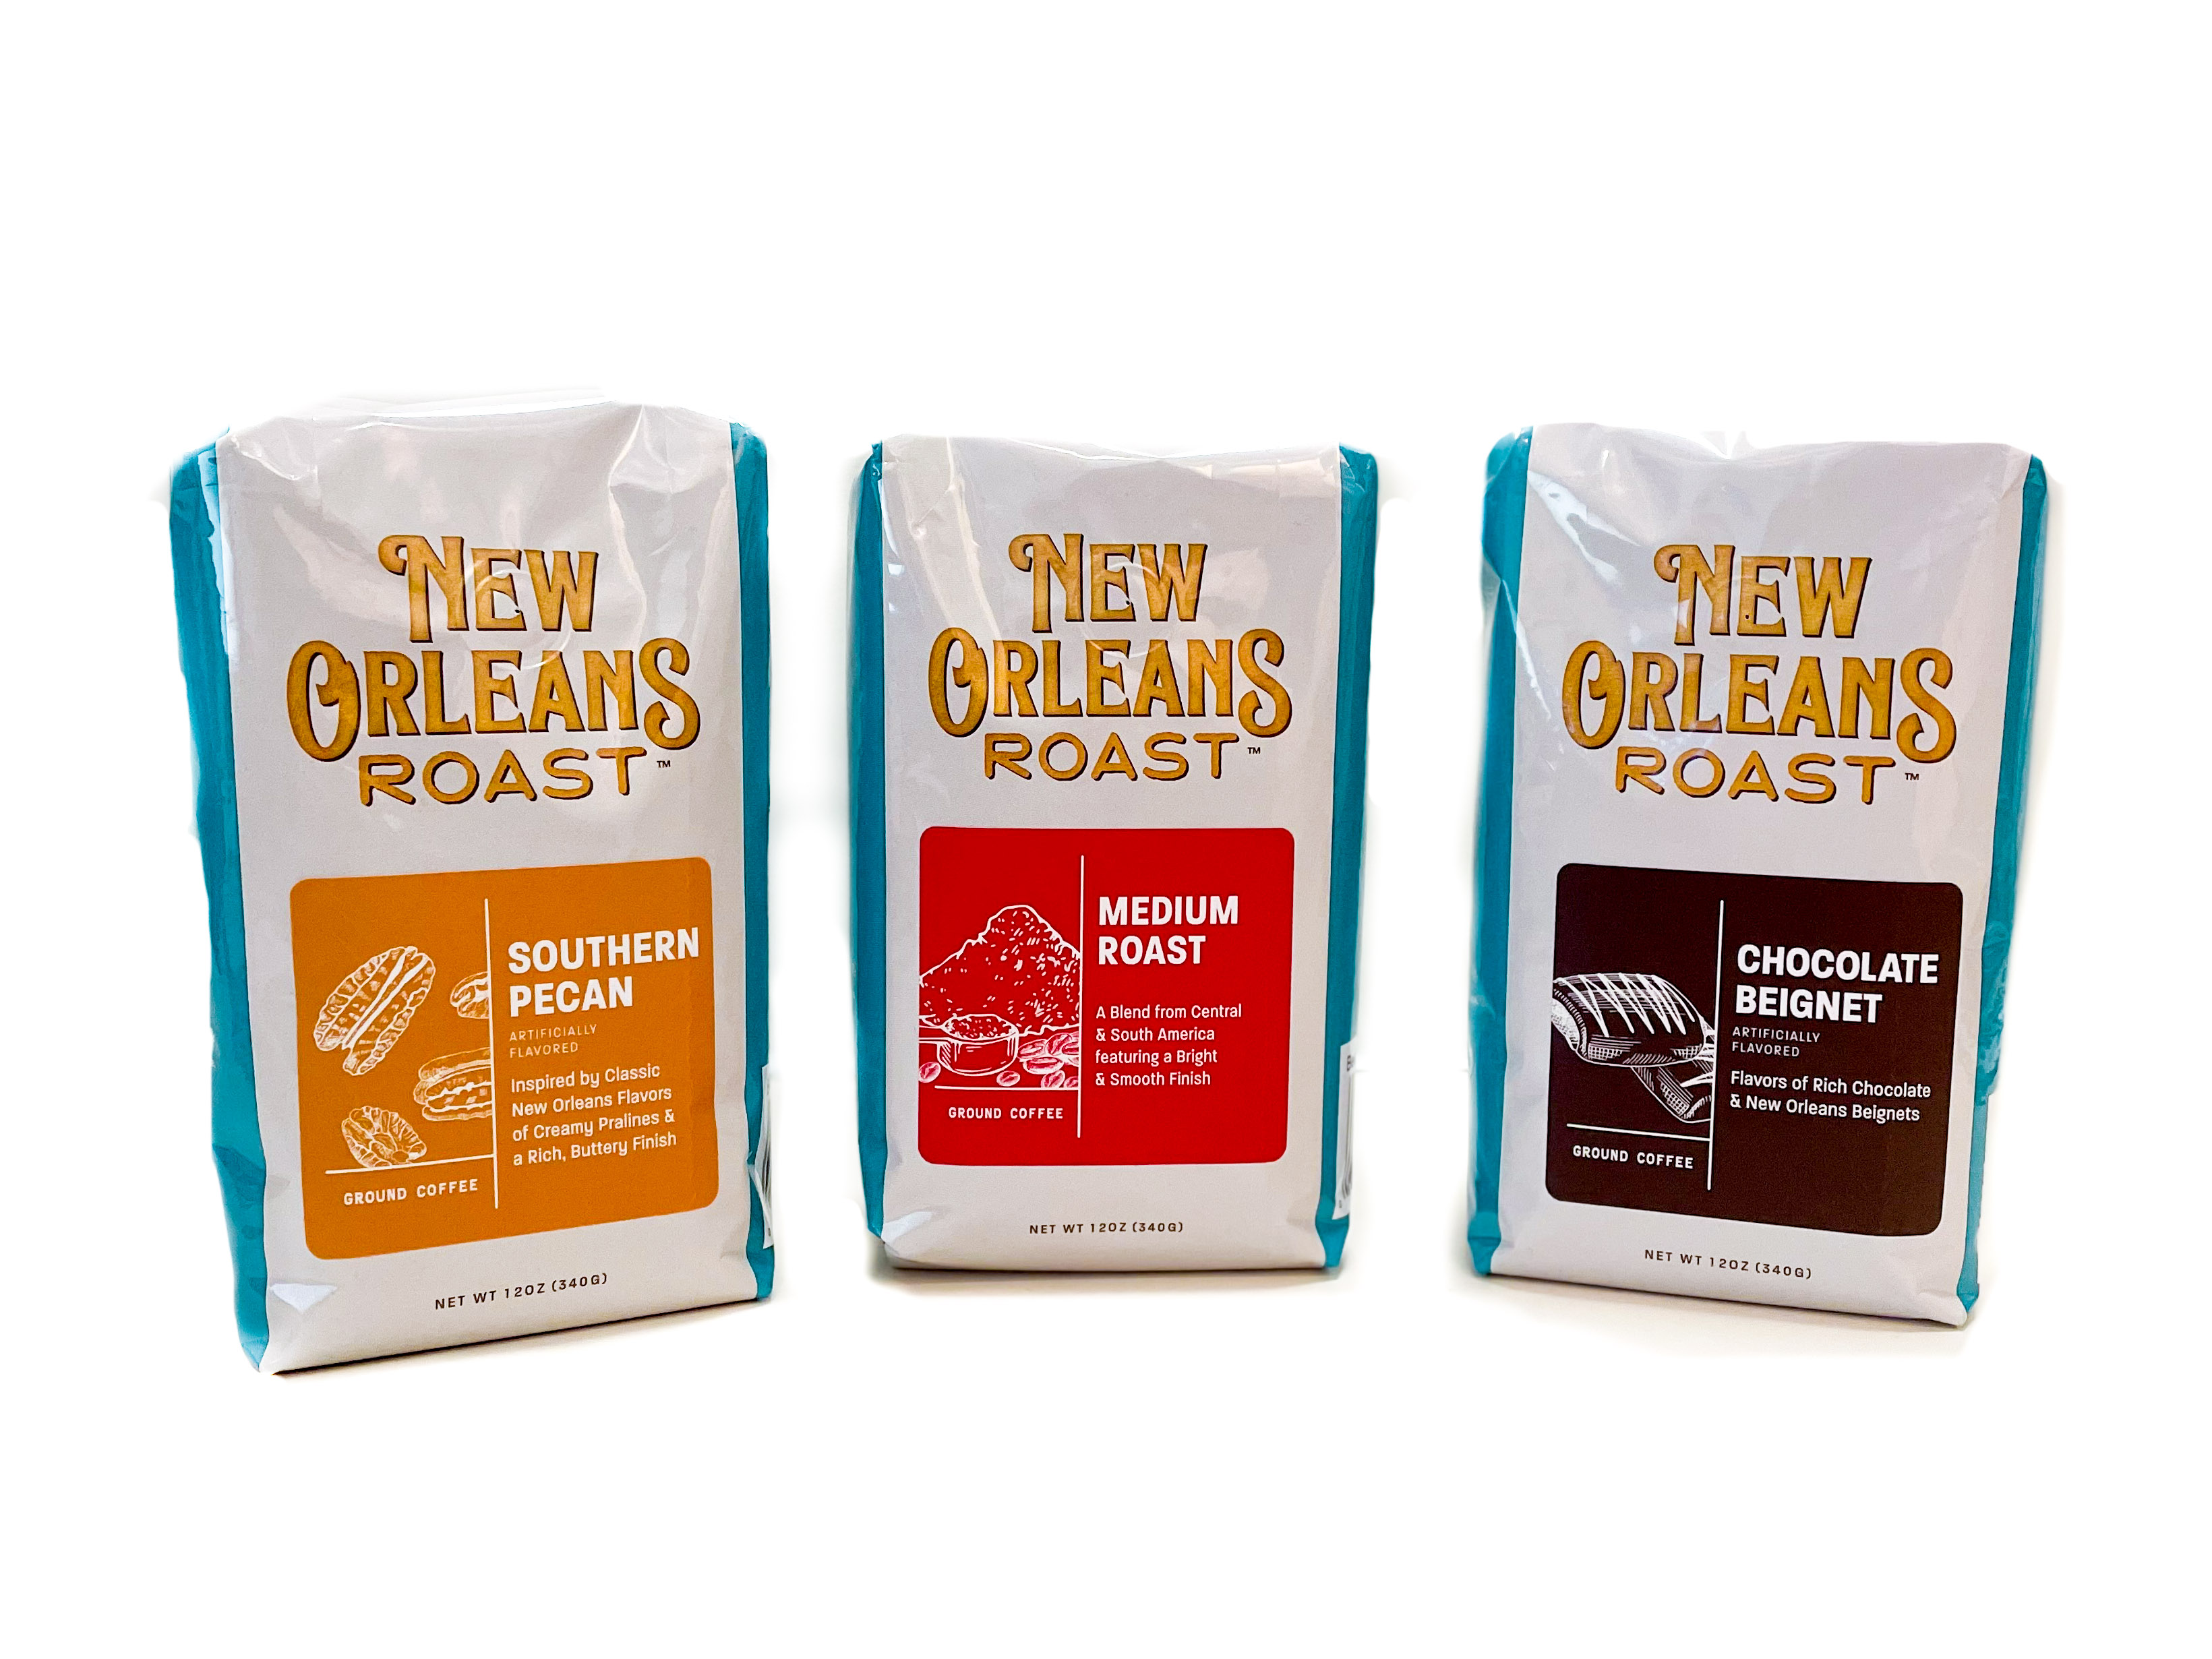 Walmart customers will be able to enjoy three flavorful blends of New Orleans Roast Coffee: Southern Pecan, Medium Roast, and Chocolate Beignet.